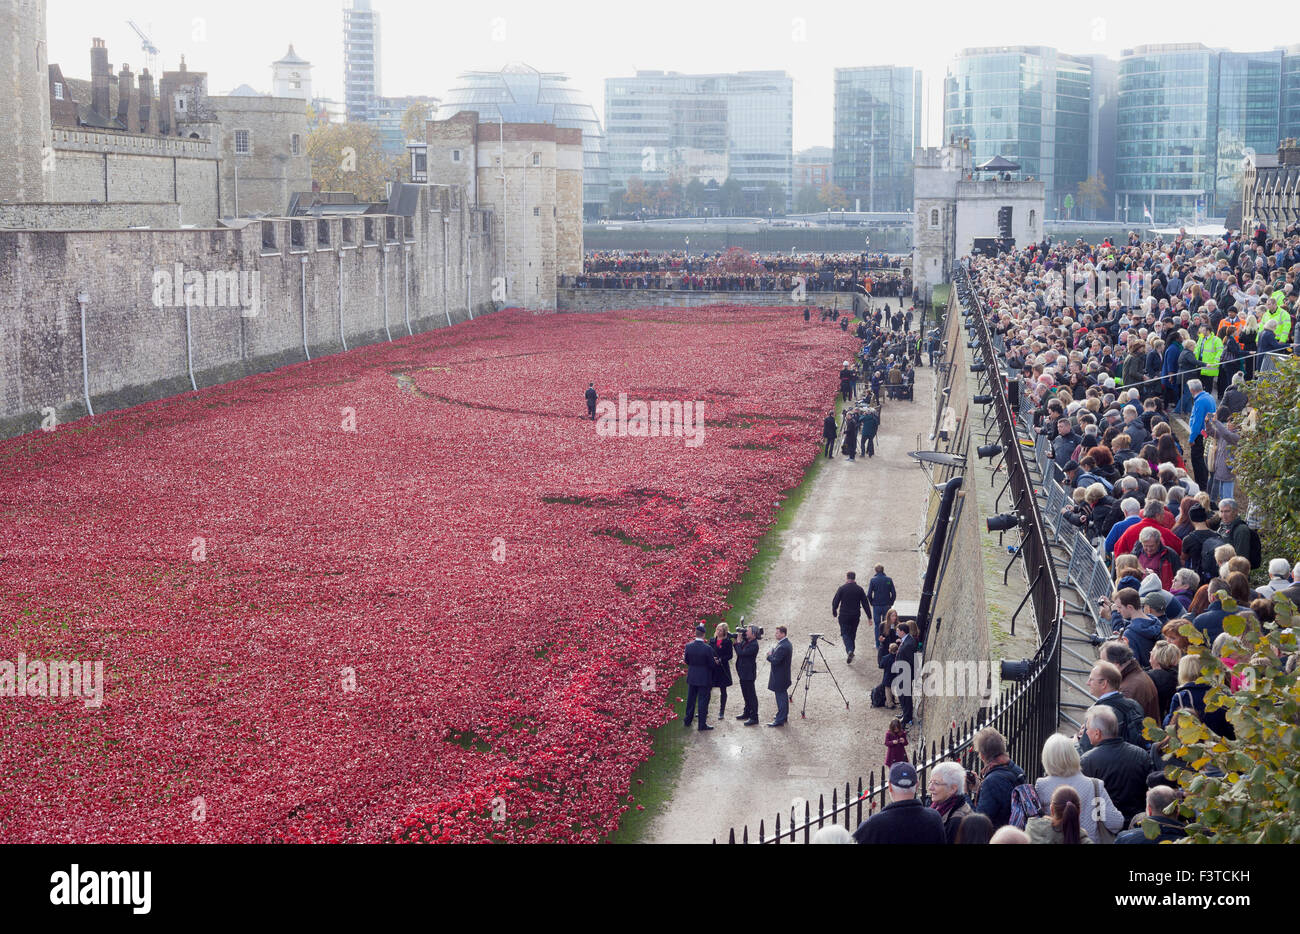 Remembrance celebrations 2014. 'Blood swept sees and land of red', an art installation by Paul Cummins at the Tower of London. Stock Photo